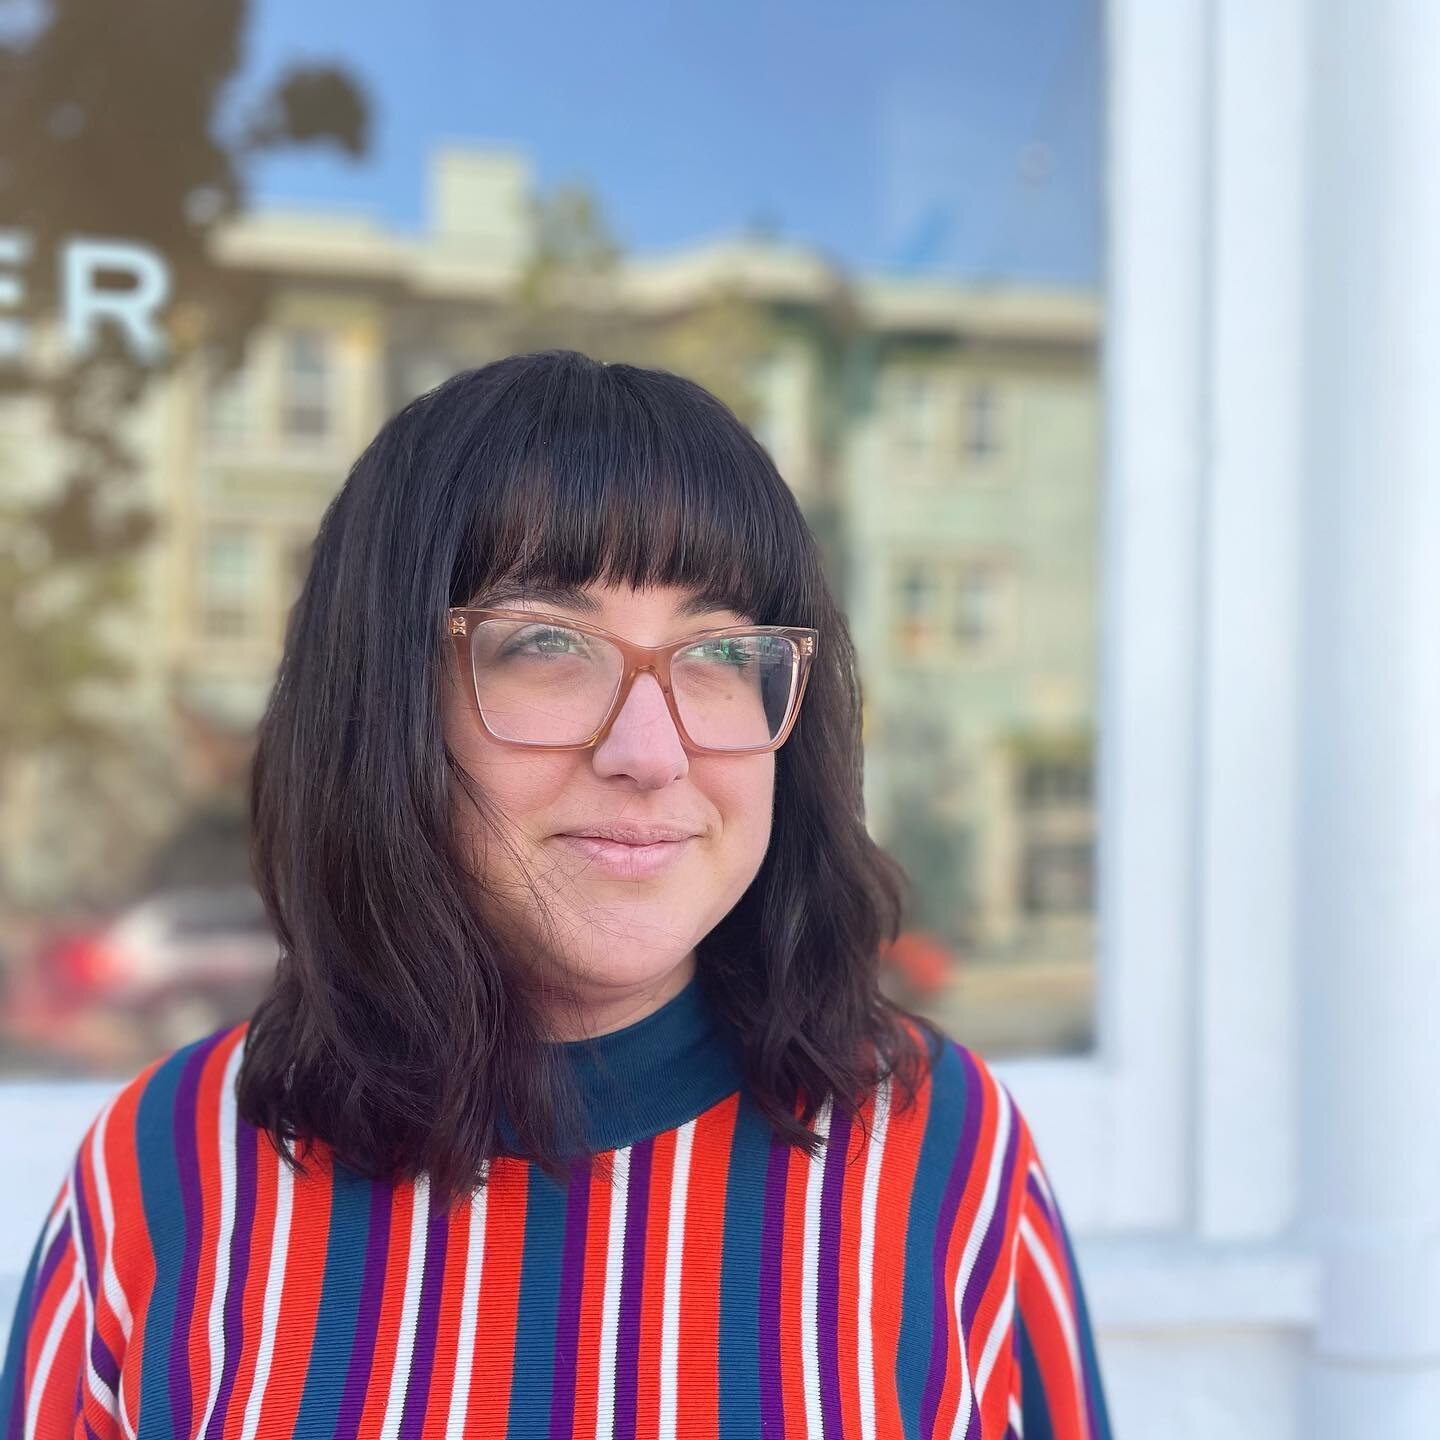 Carly&rsquo;s new bangs for spring 🌼 

Cut by @michaelhuntersf 

#flowerhairstudiosf #michaelatflower #sfhairstylist #bangs #spring